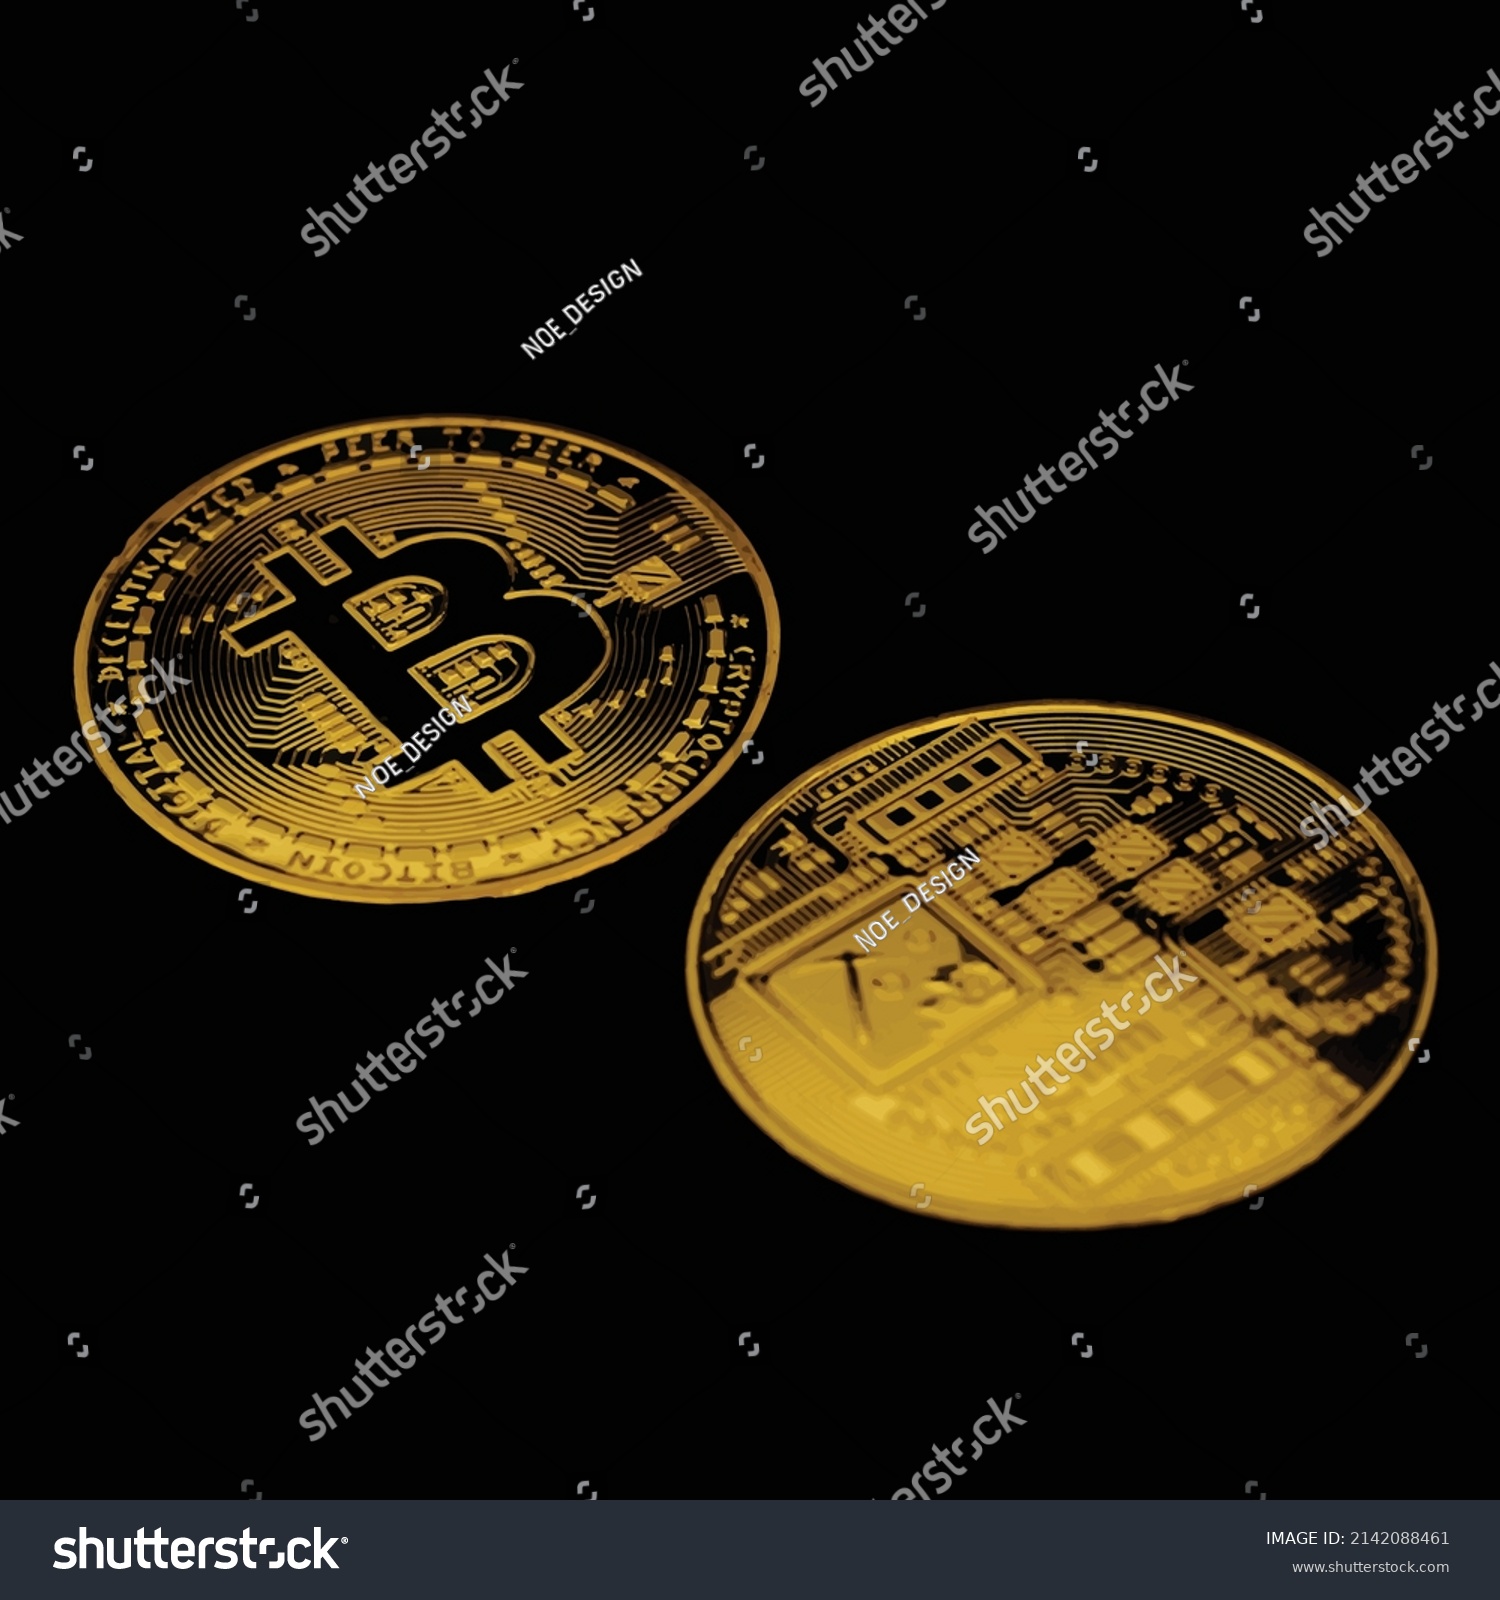 SVG of two dollar coin illustration vector svg